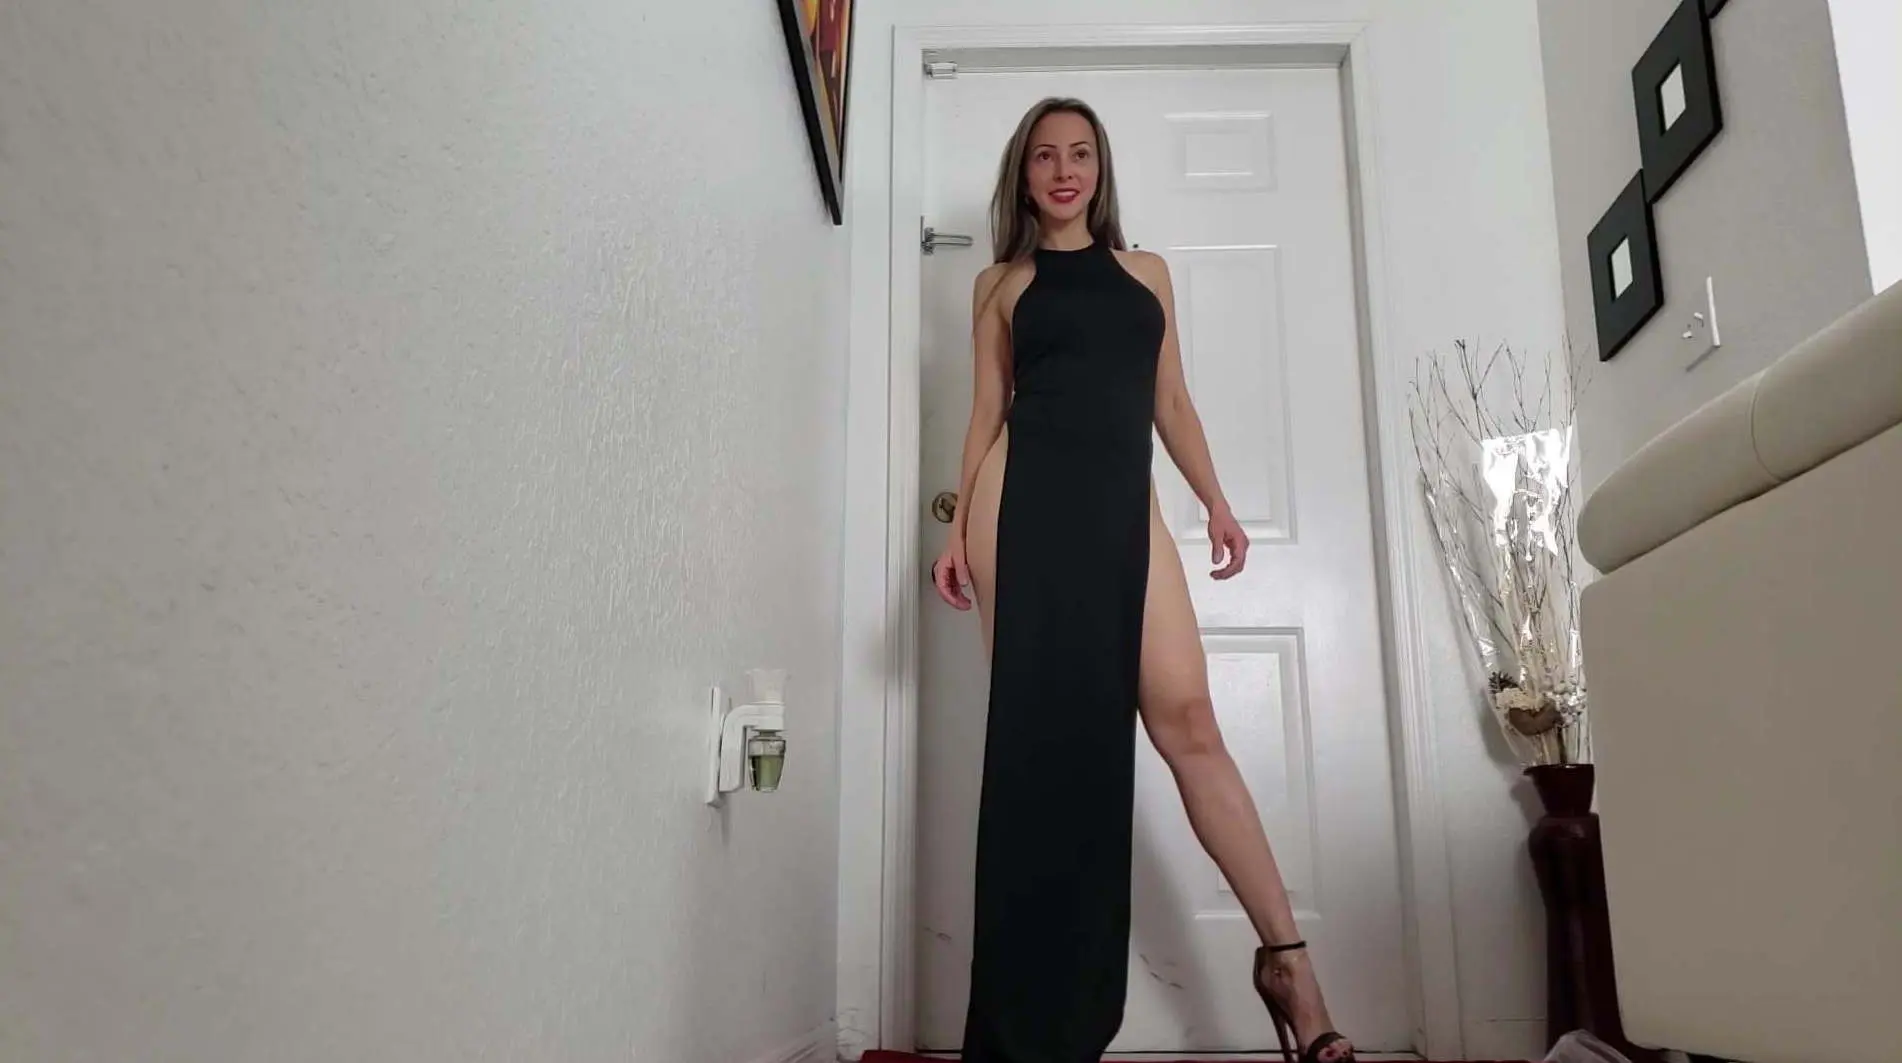 Porn In Dress - Posing in black high heels & long dress with high slit legs - Sunporno